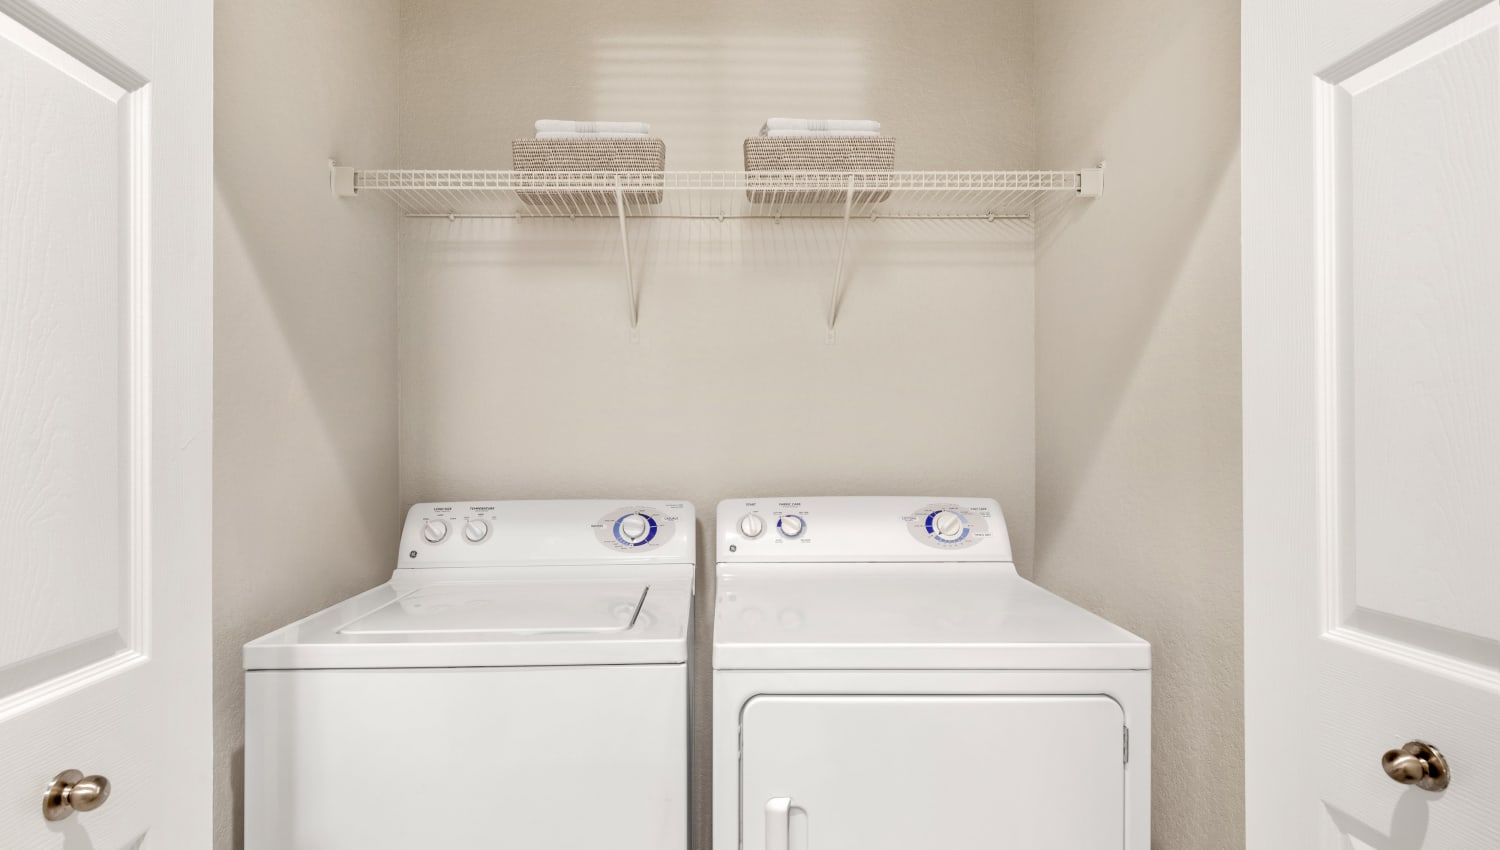 Simple laundry area  at Mirador & Stovall at River City in Jacksonville, Florida